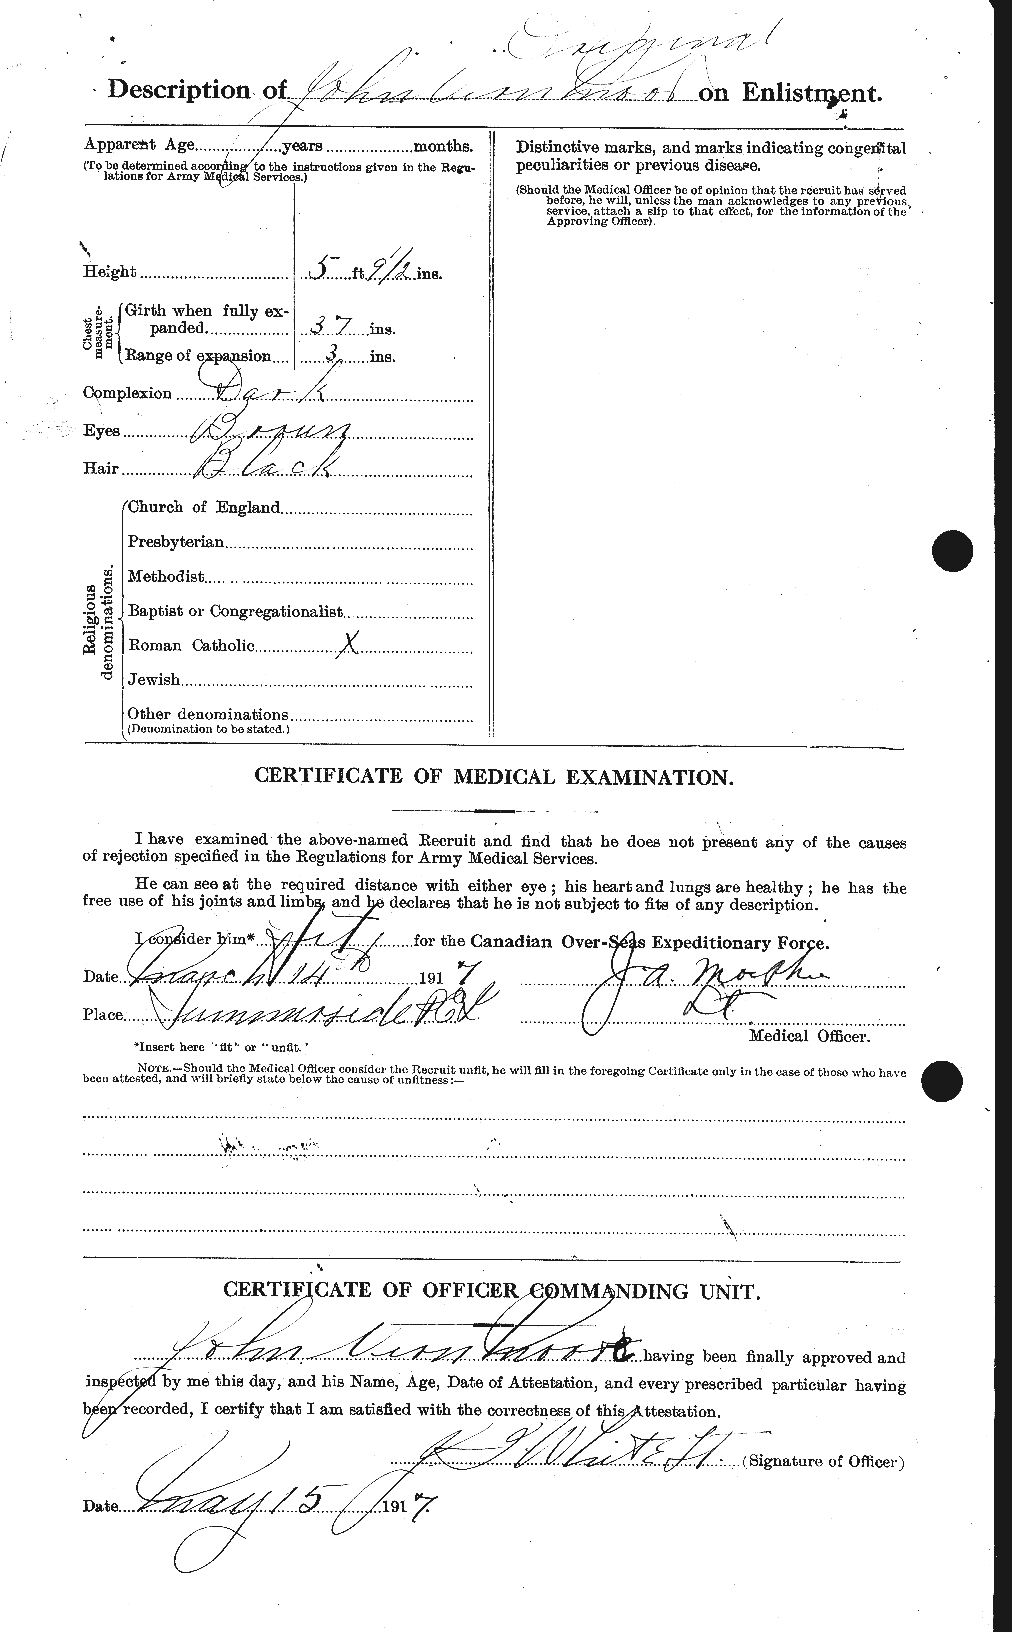 Personnel Records of the First World War - CEF 503342b